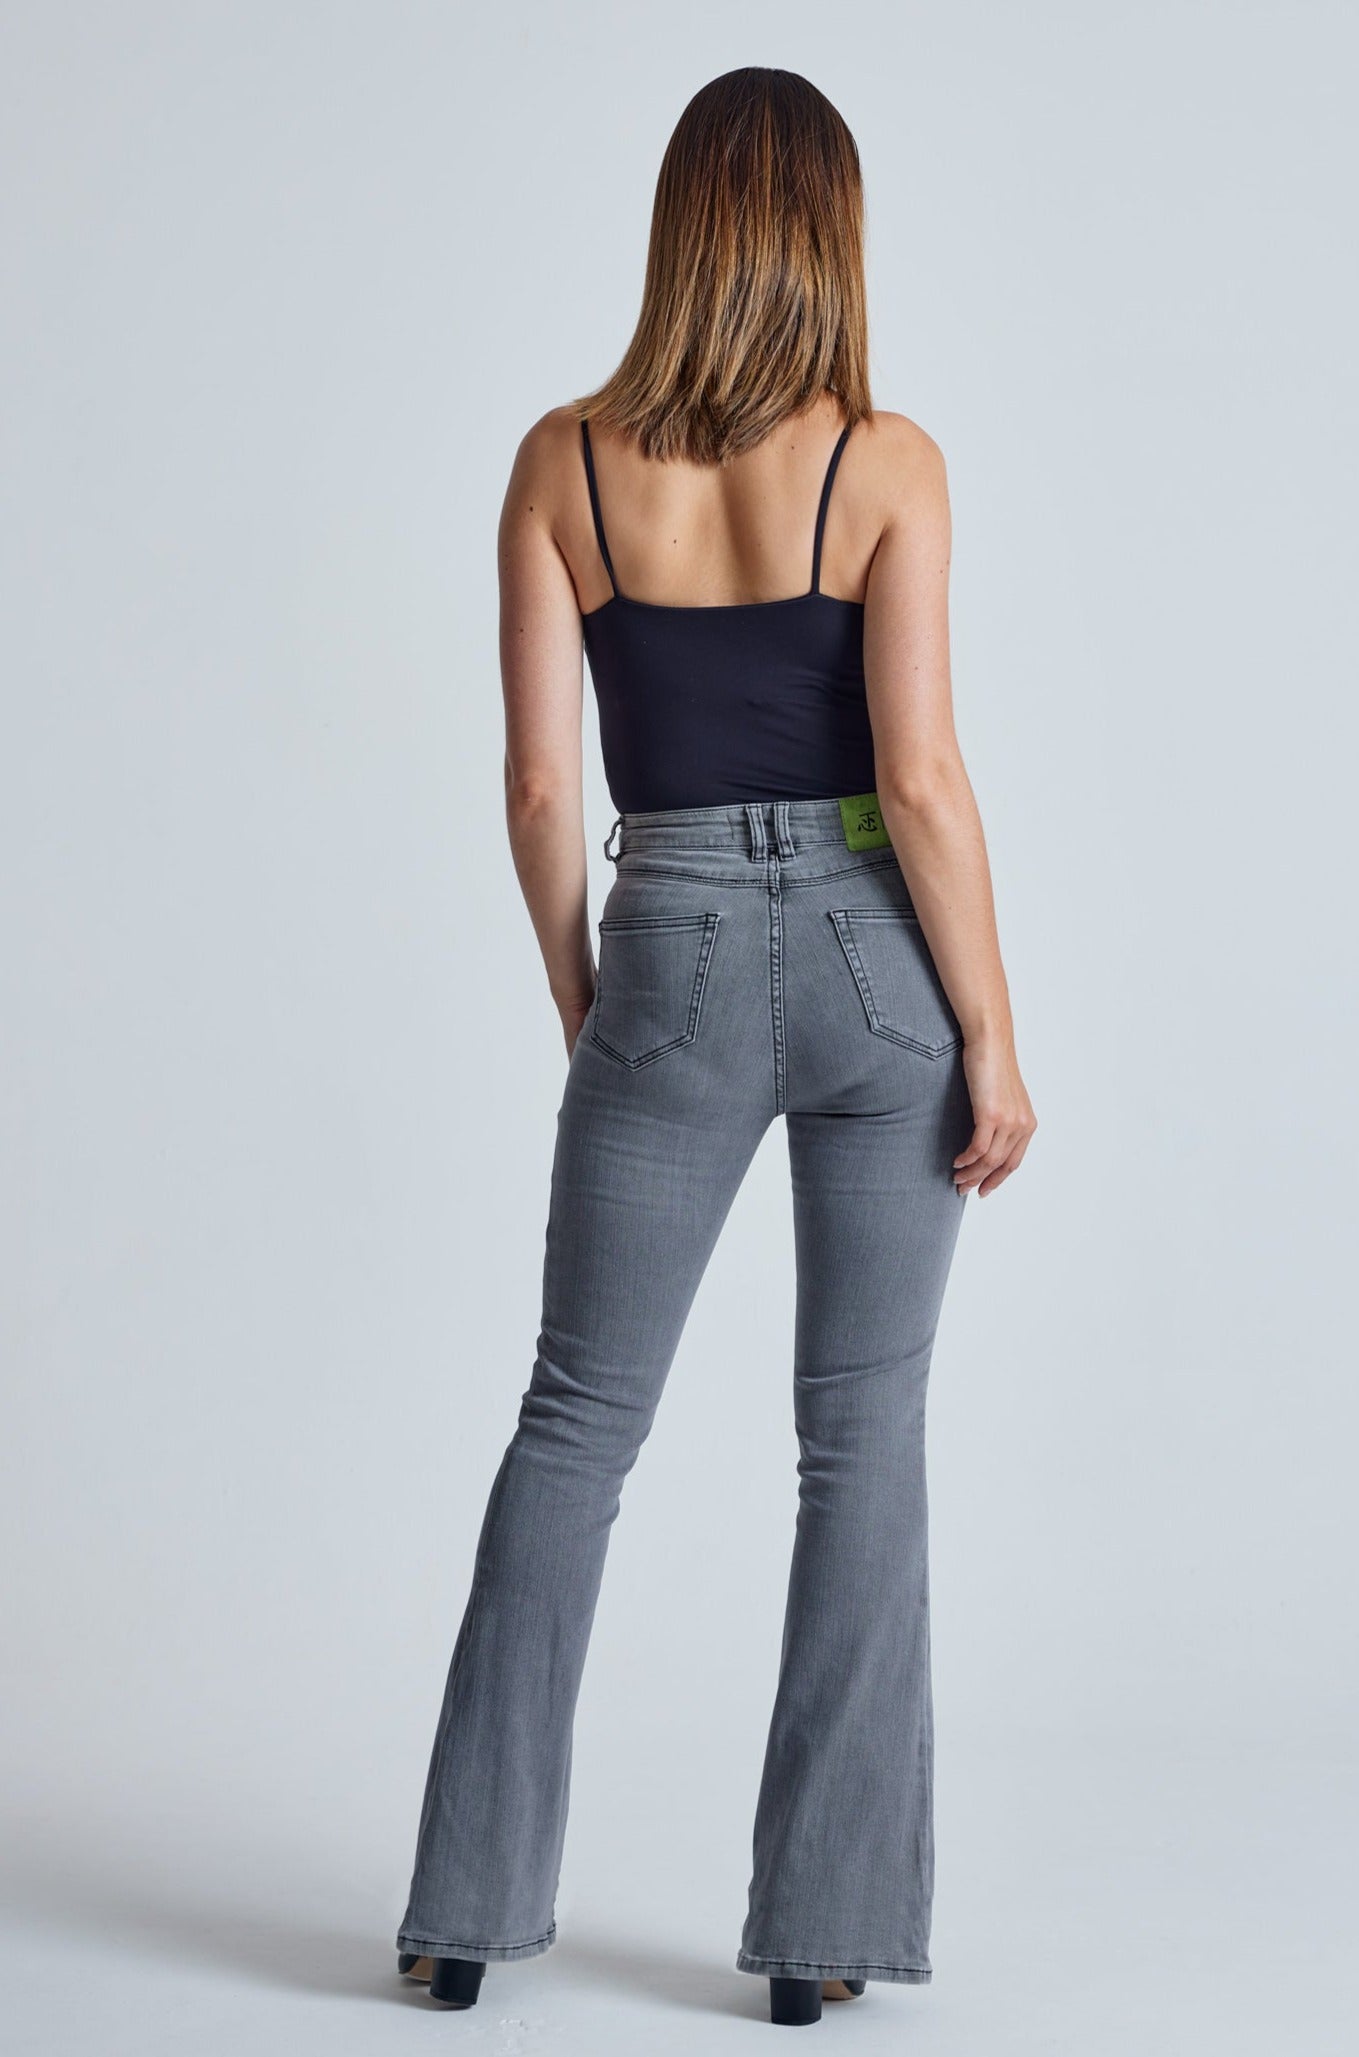 Silver Fox Mavis High Waisted Skinny flared Jeans - GOTS Certified Organic Cotton and Recycled Polyester